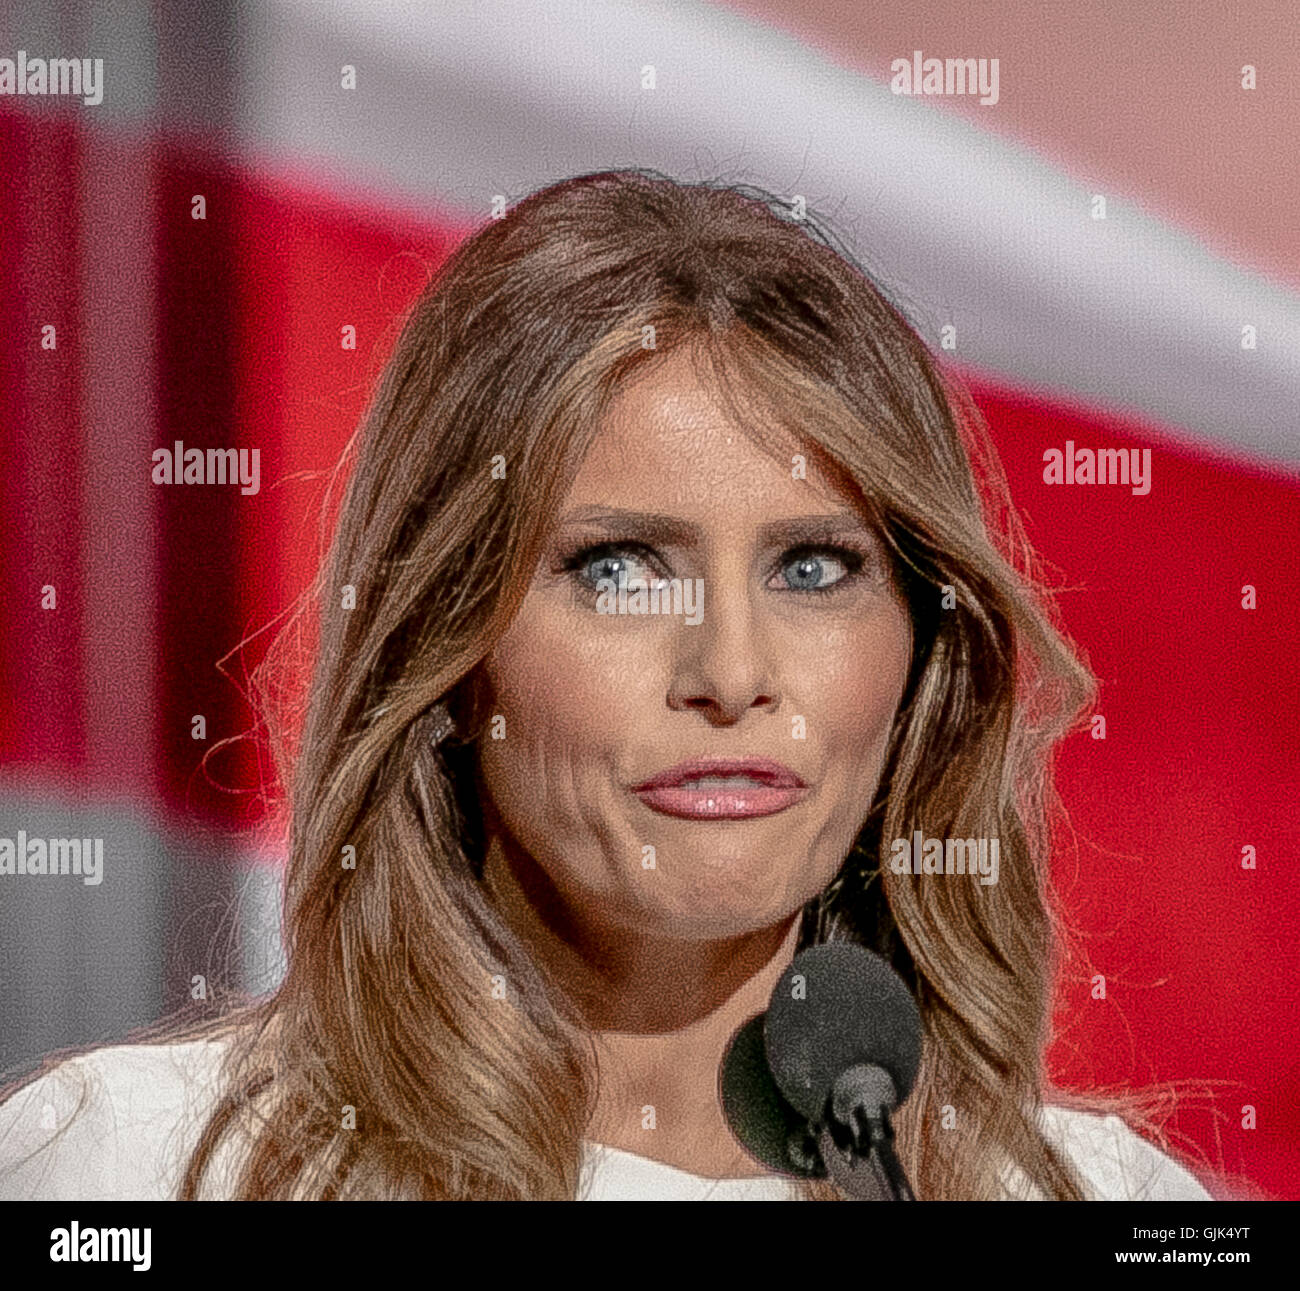 Melania Trump Model High Resolution Stock Photography and Images - Alamy